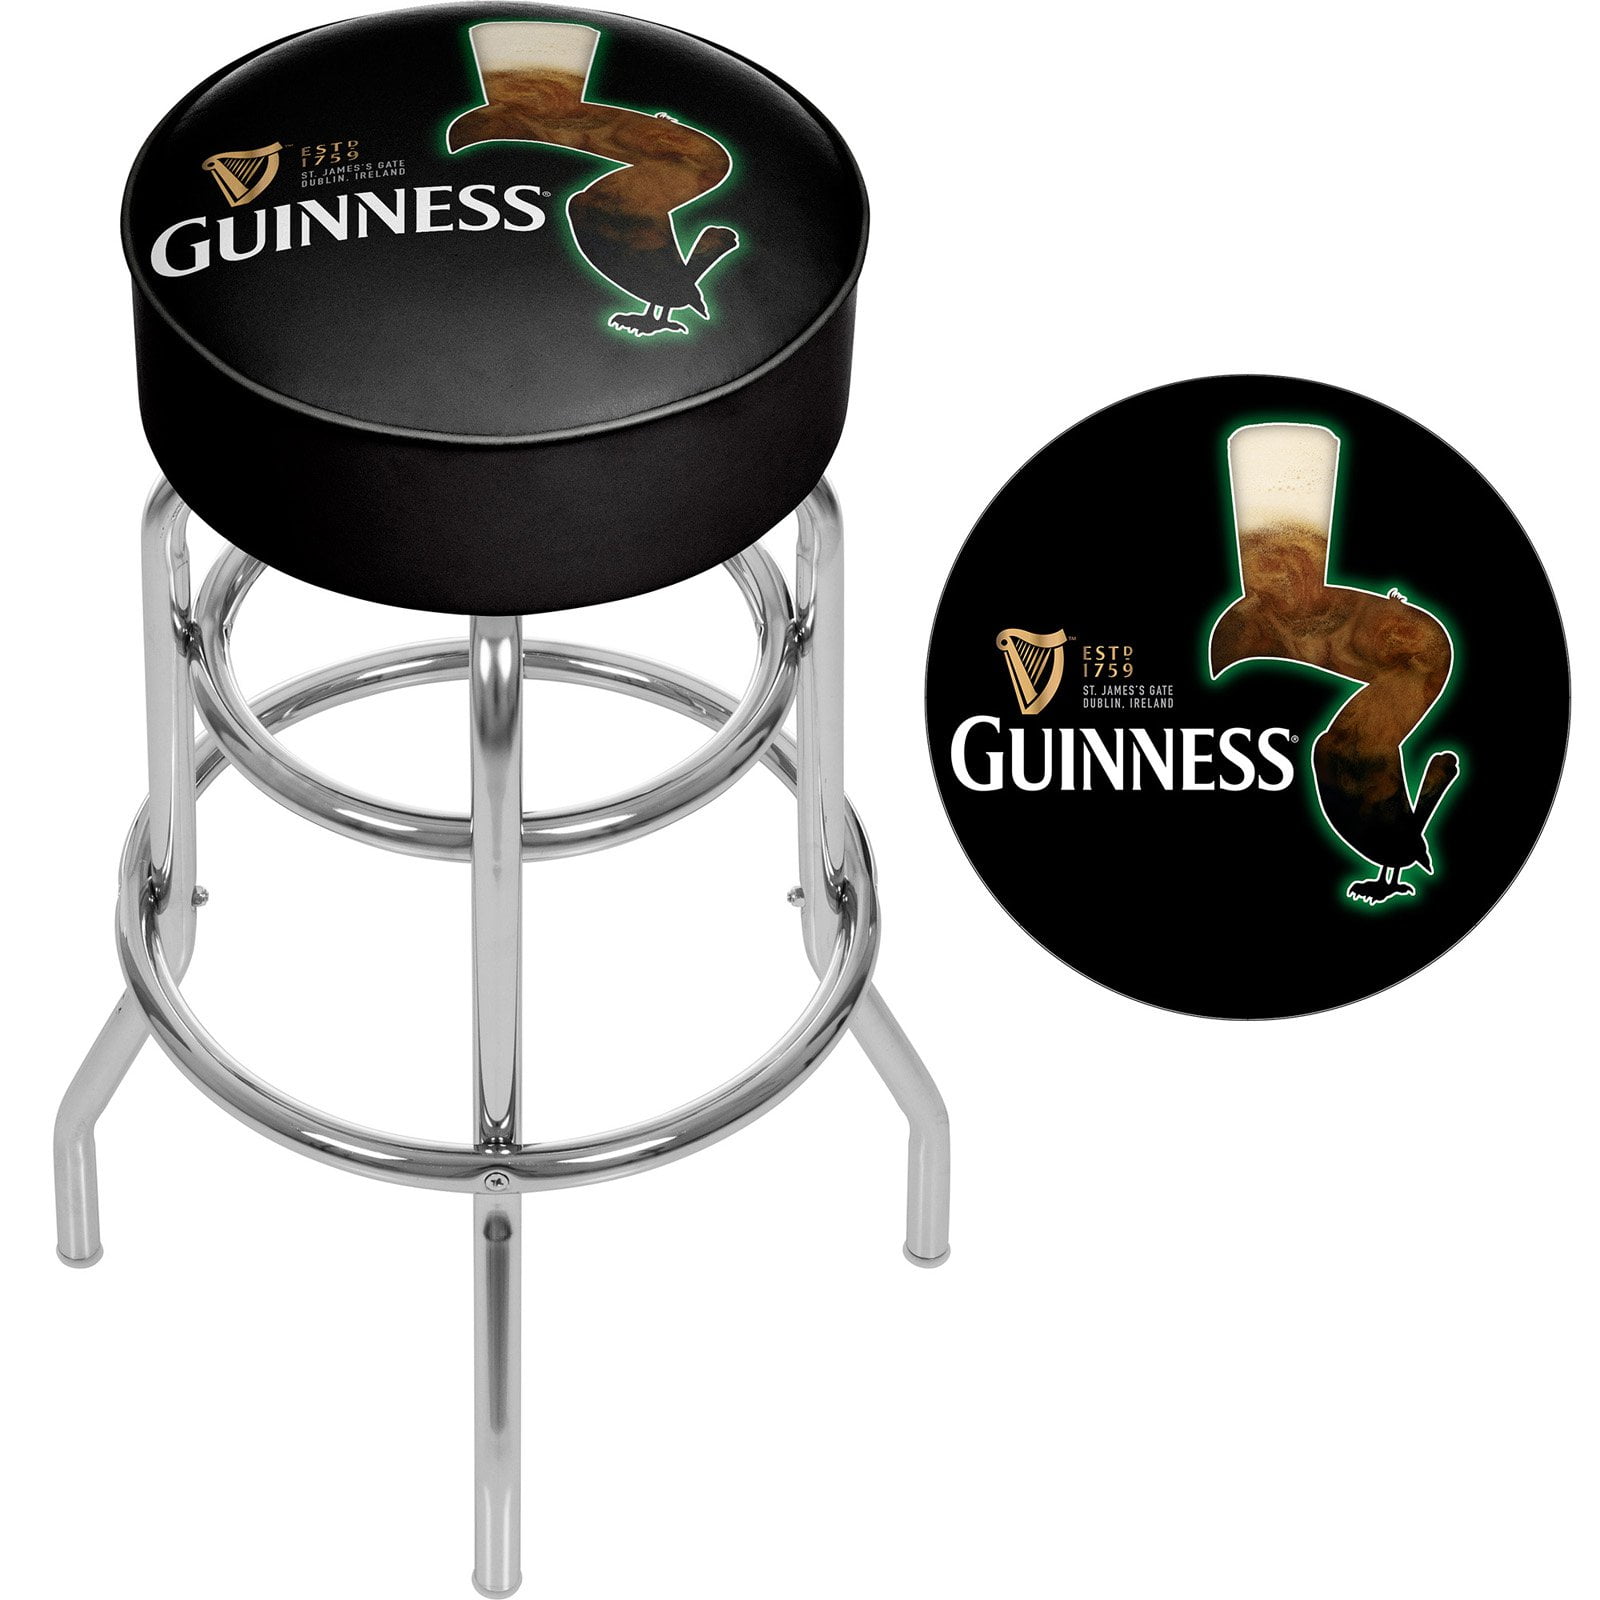 Stools man cave storage padded stools Metal storage boxes Guinness 